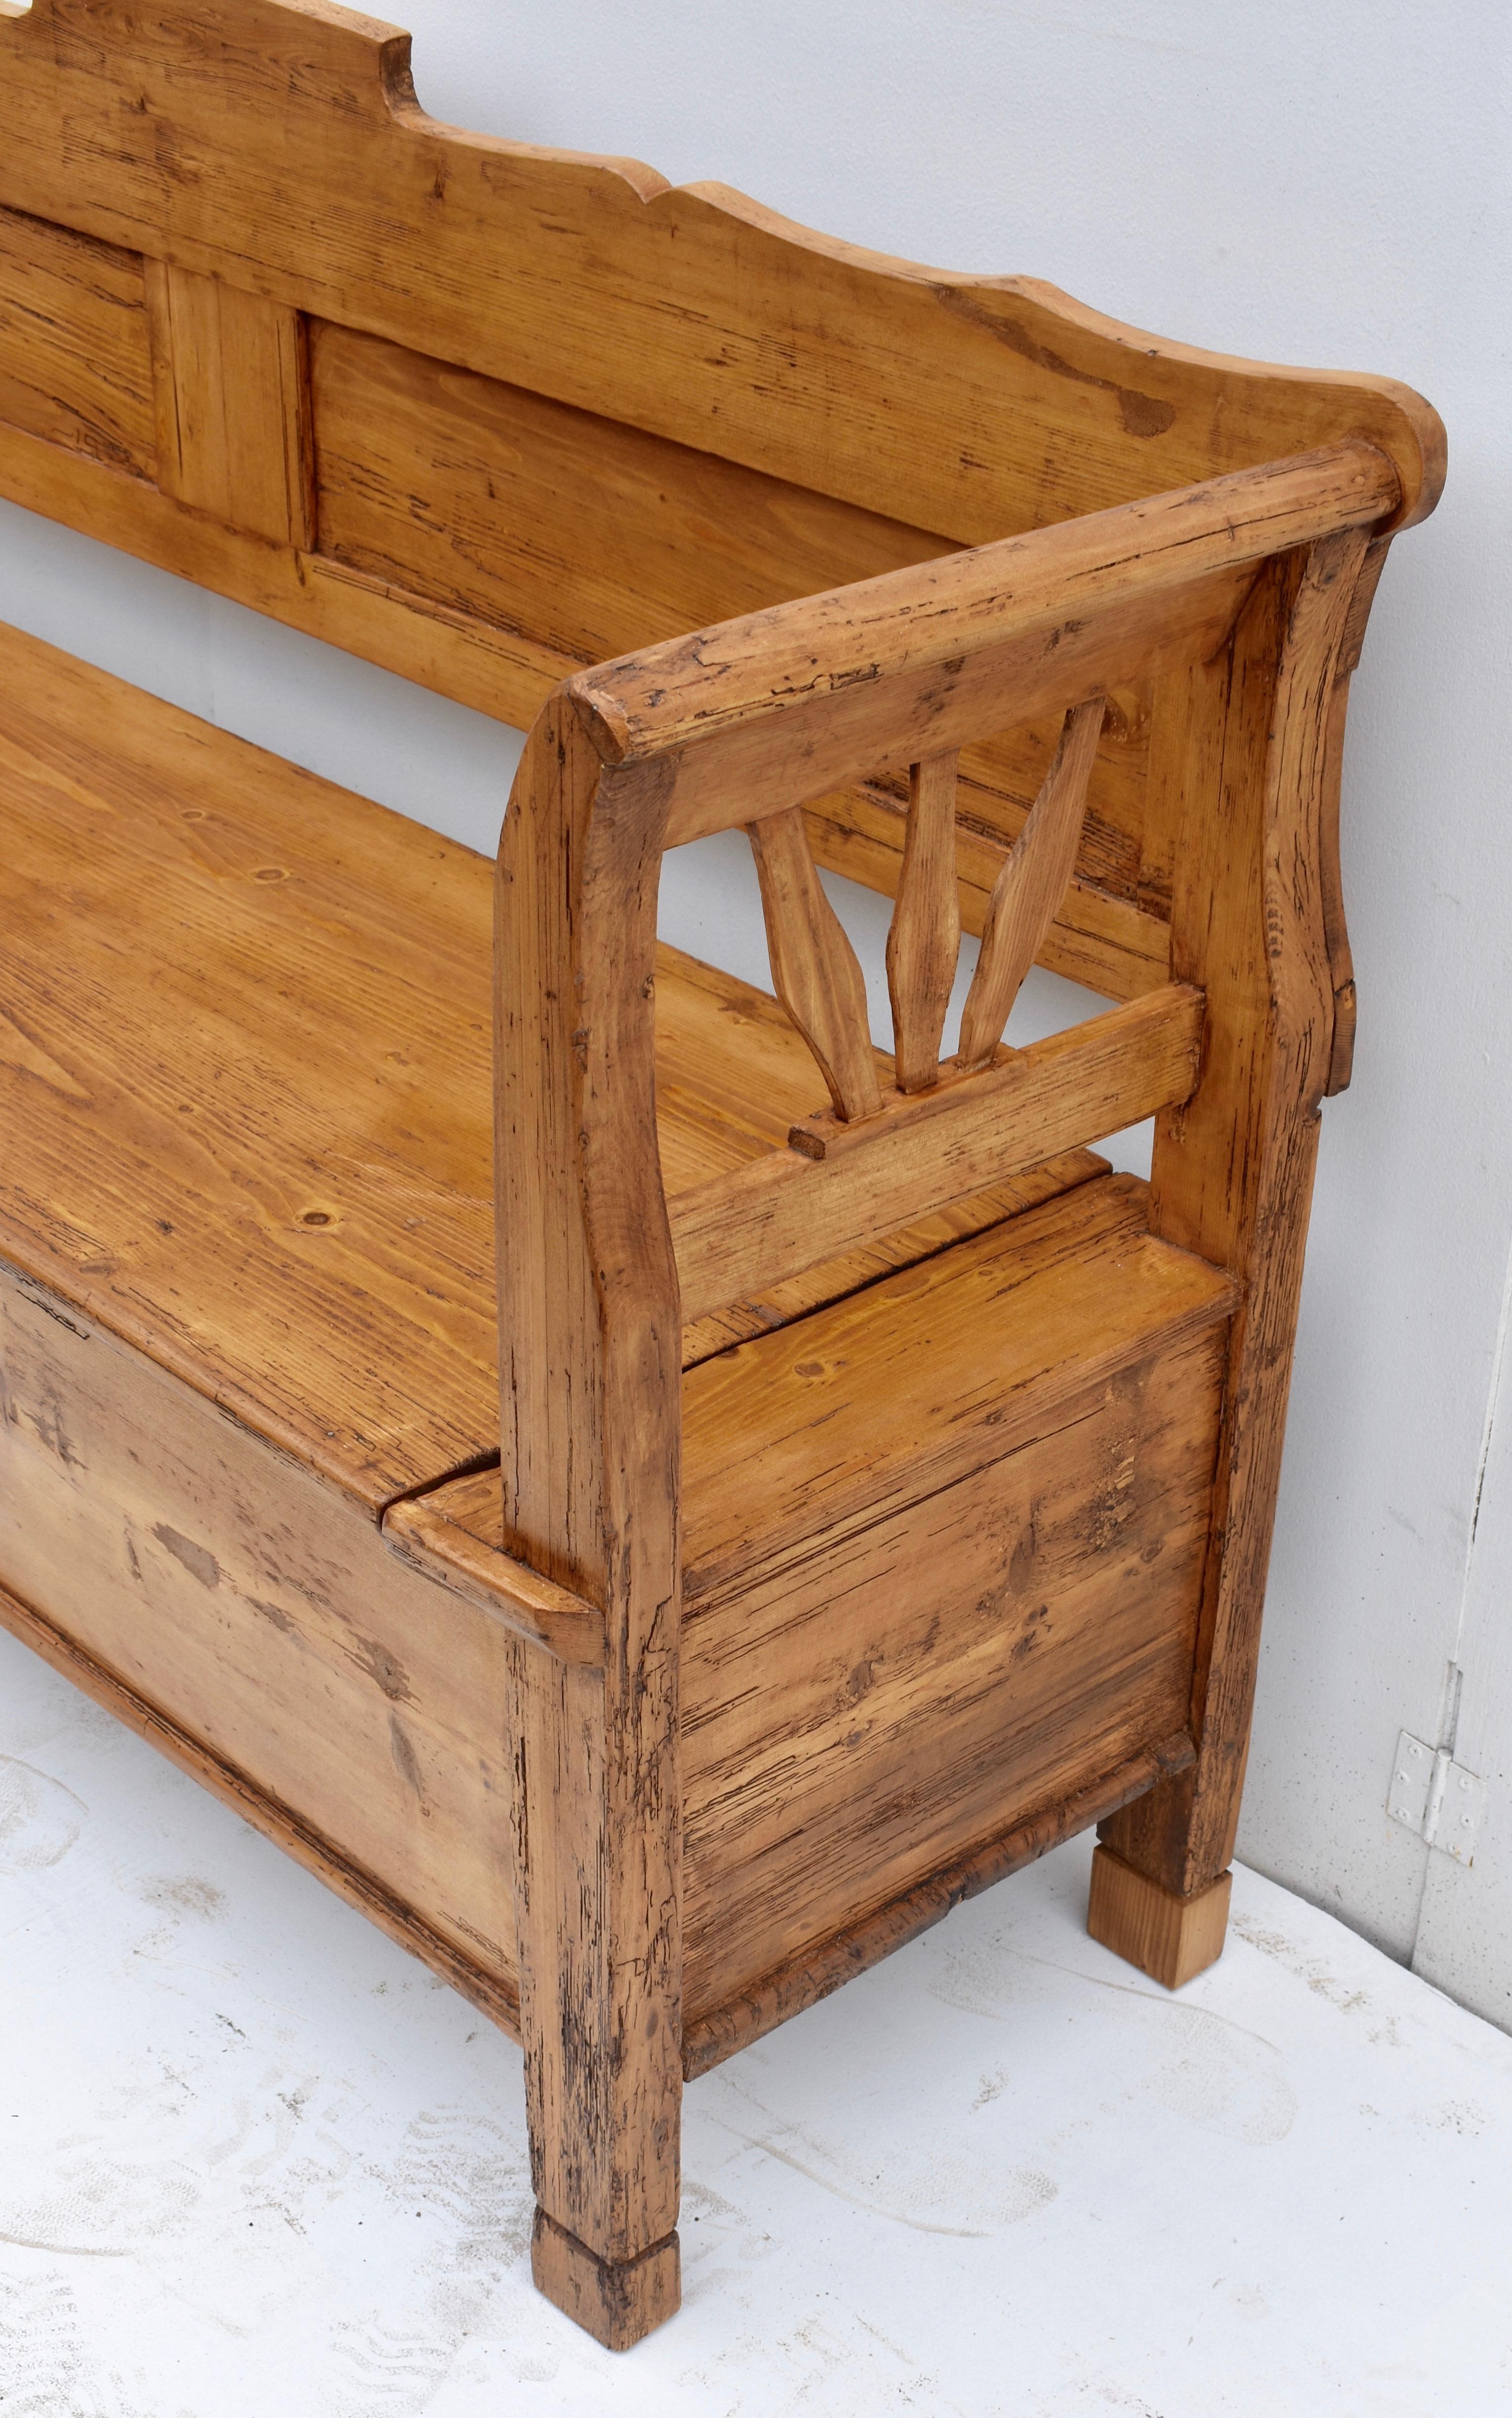 Hungarian Pine and Oak storage Bench or Settle